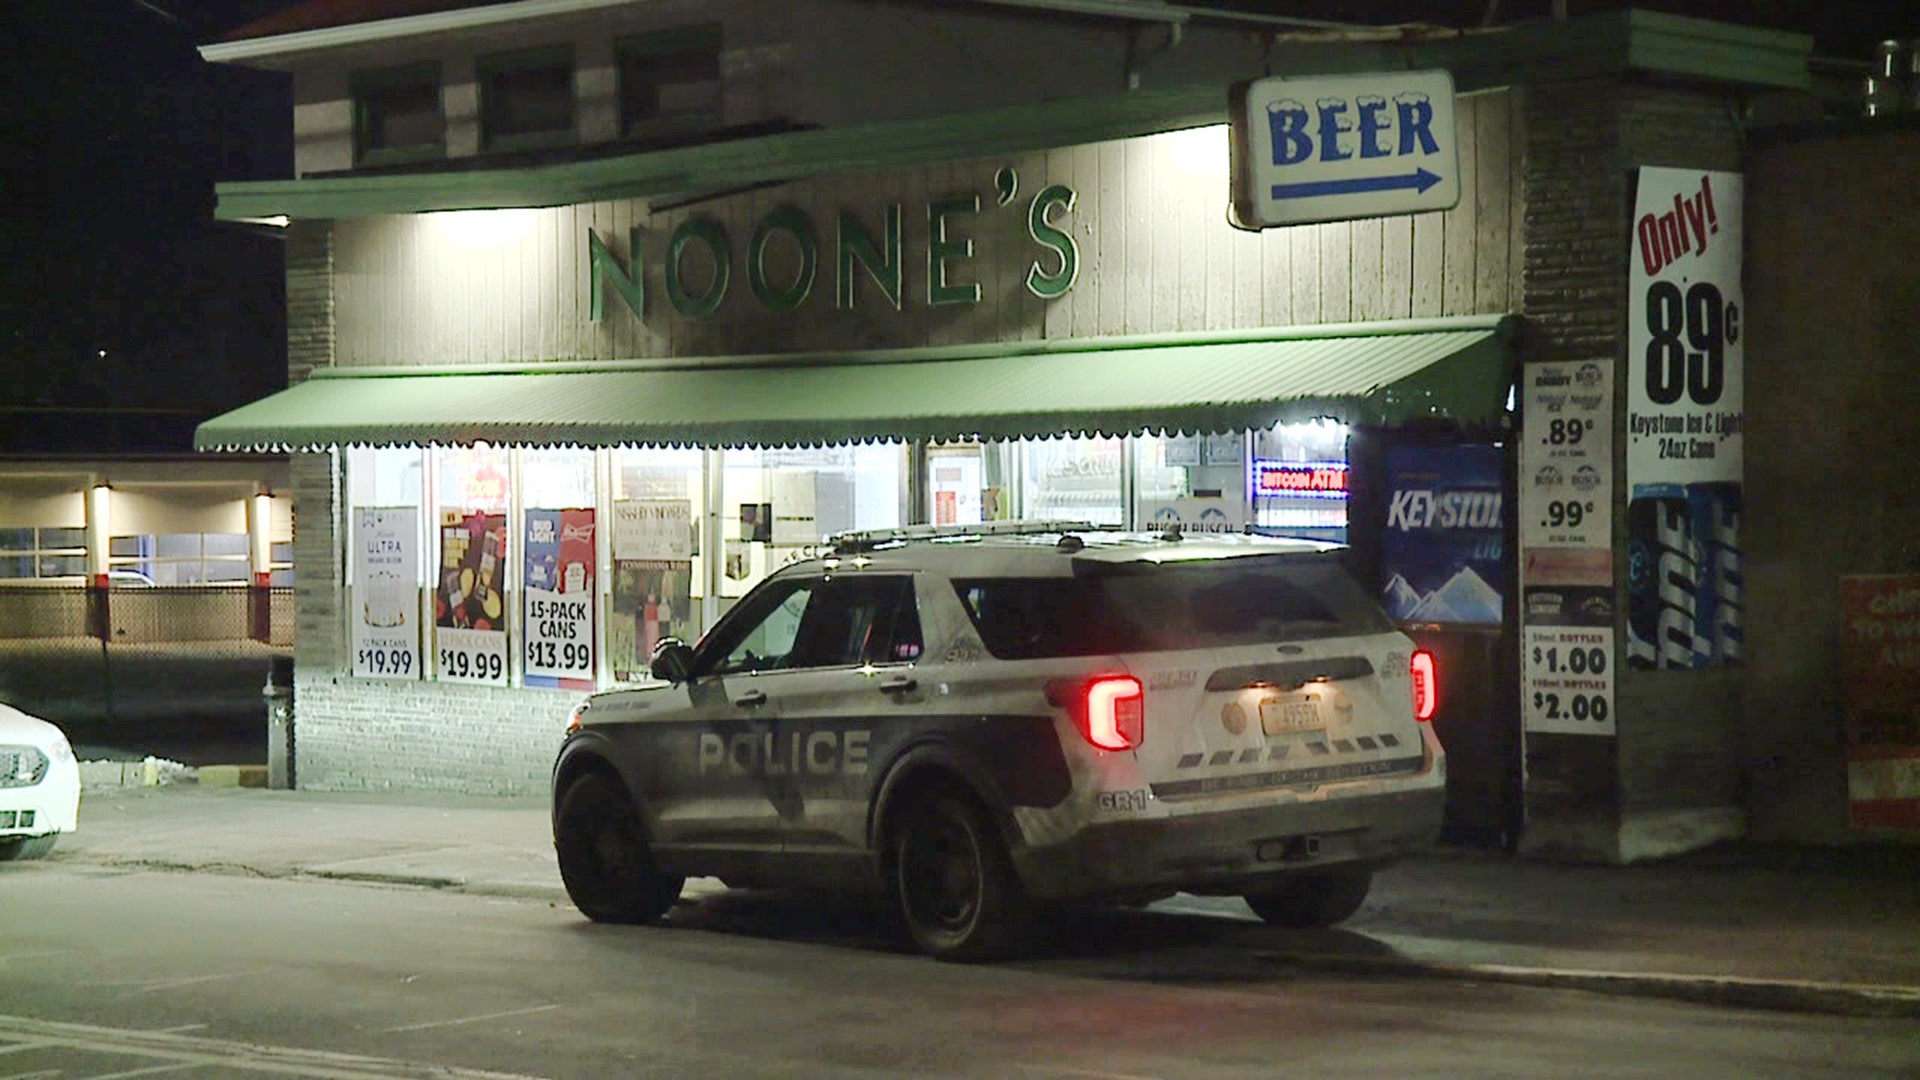 Noone's on West Market Street was robbed Tuesday night.